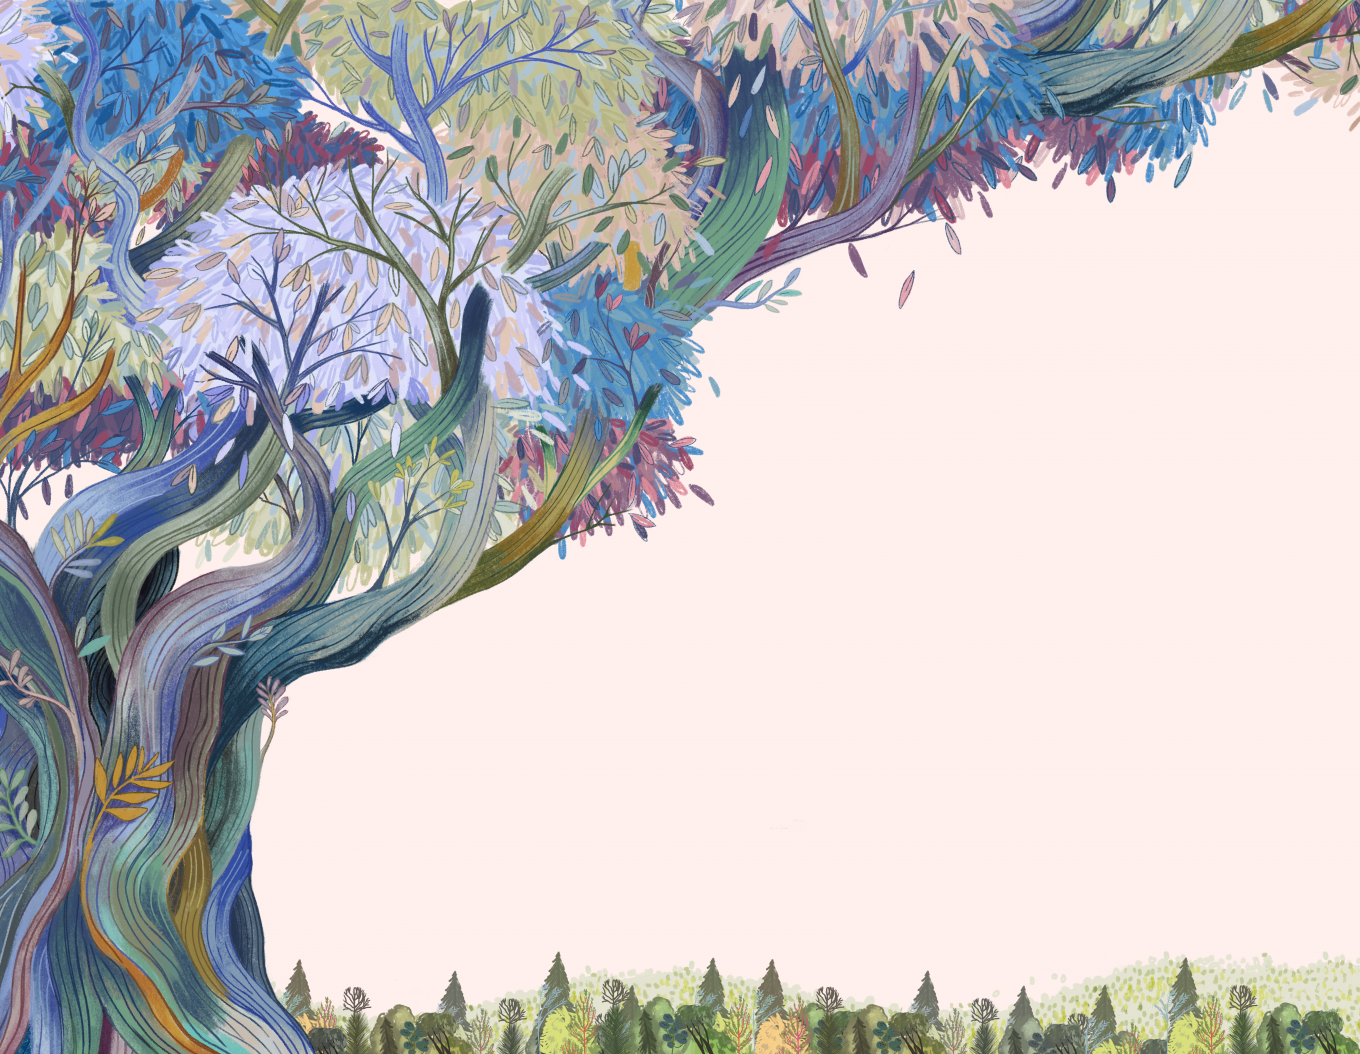 Illustration of a multi-colored tree standing tall in a forest by artist Monica Chu